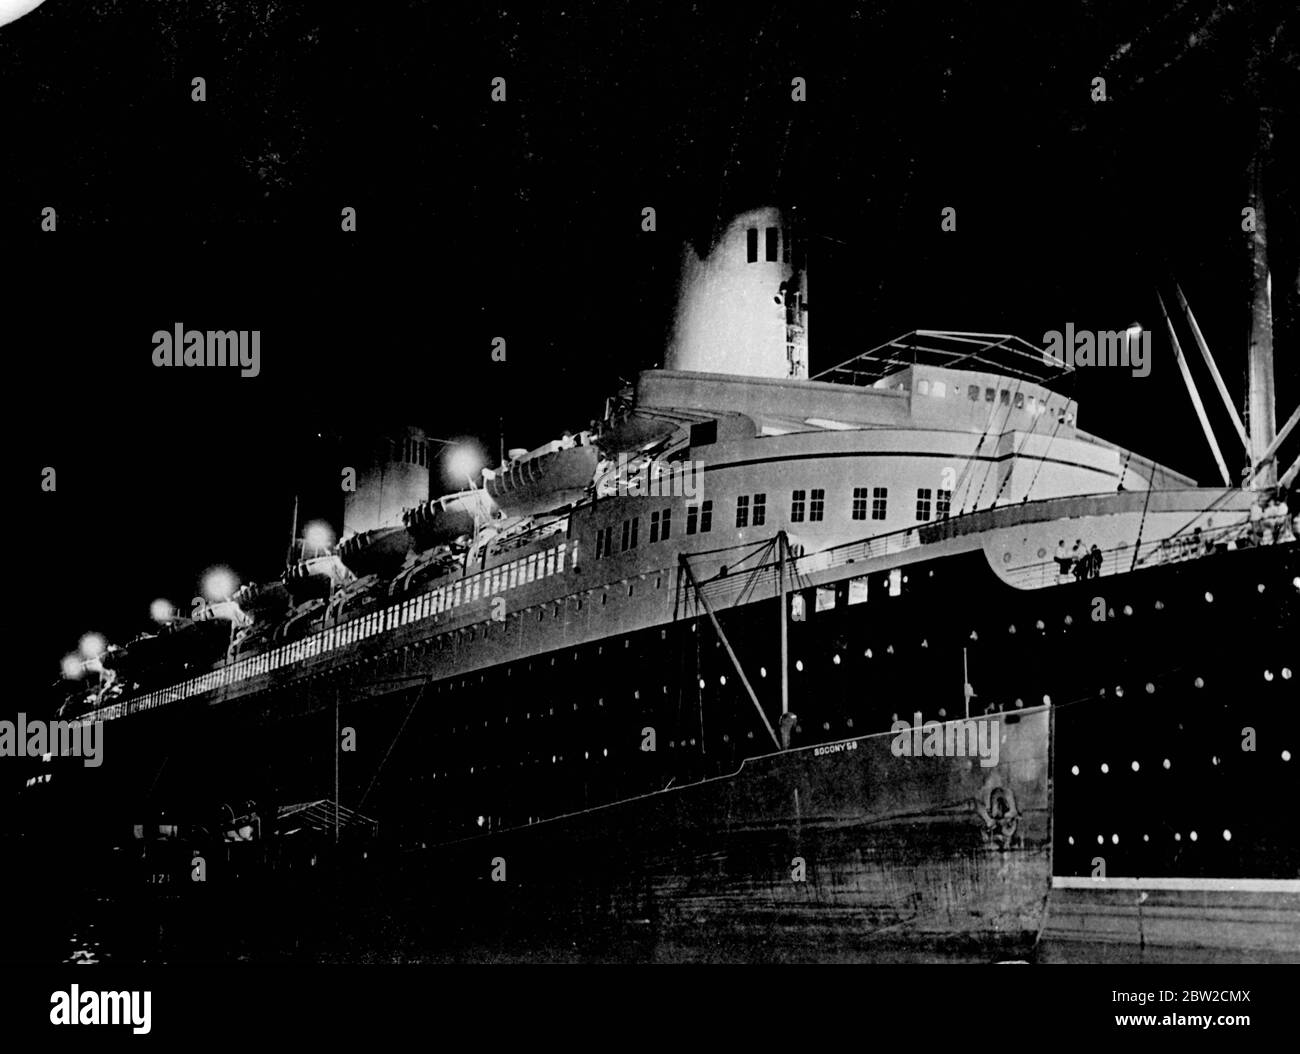 The North German Lloyd liner Bremen, which arrived in New York with 1600 passengers only a few hours before, is loaded with fuel oil from a tanker alongside during the early hours of 29 August, preparatory to dash back to Germany without passengers or cargo. Preparations for the trip home, under sealed orders and under the control of the Reich Navy were carried out in feverish haste and under close guard. 29 August 1939 Stock Photo